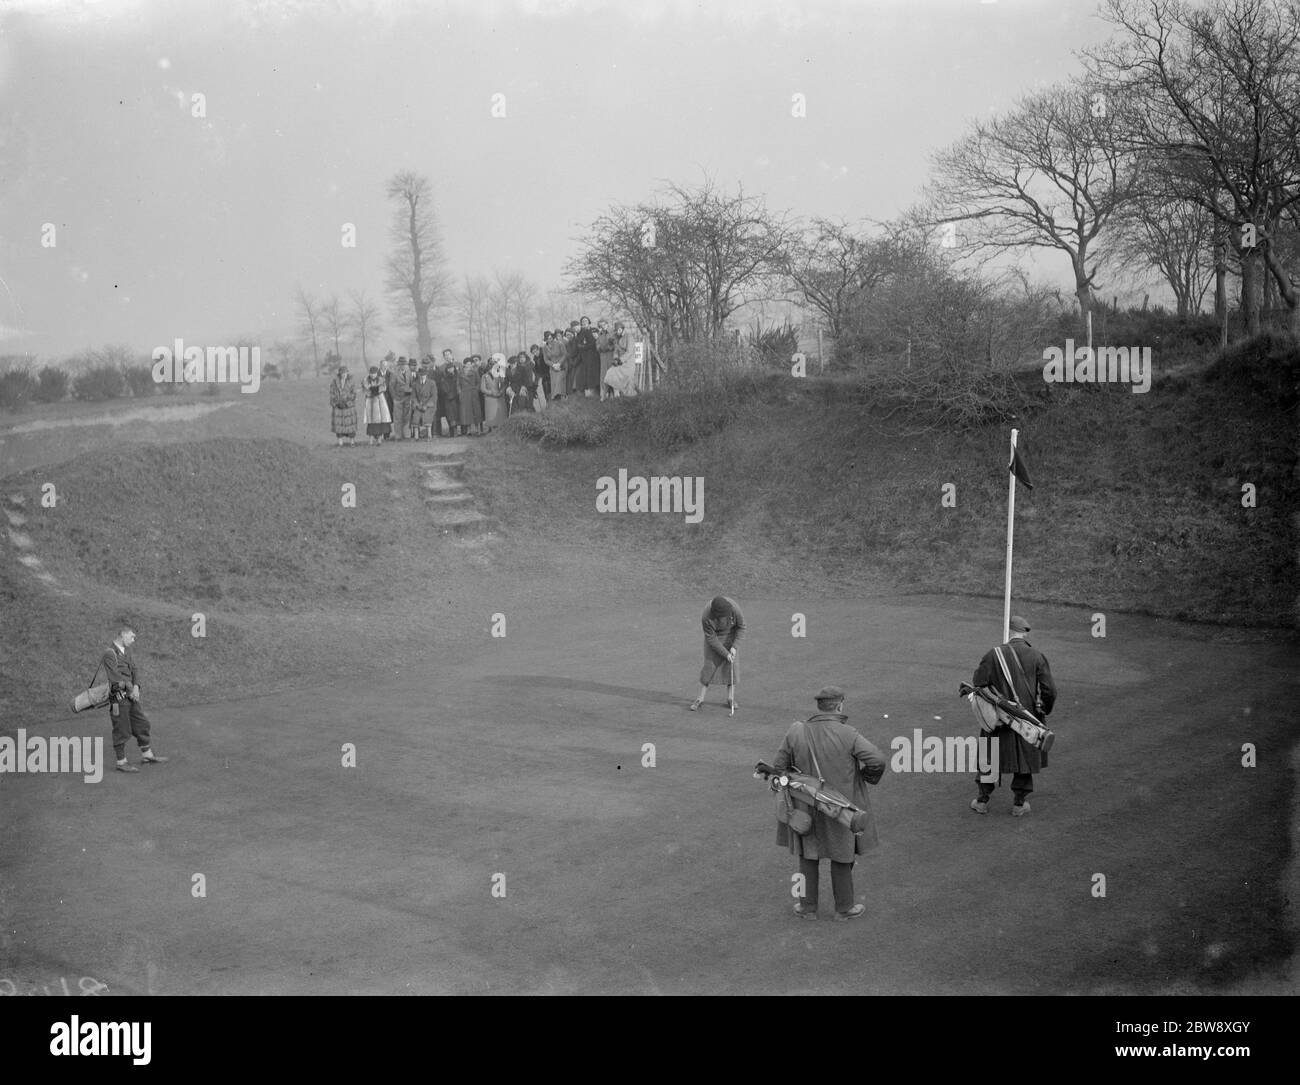 The Dartford Golf Club ladies four competition . Putting on the green . 1938 Stock Photo